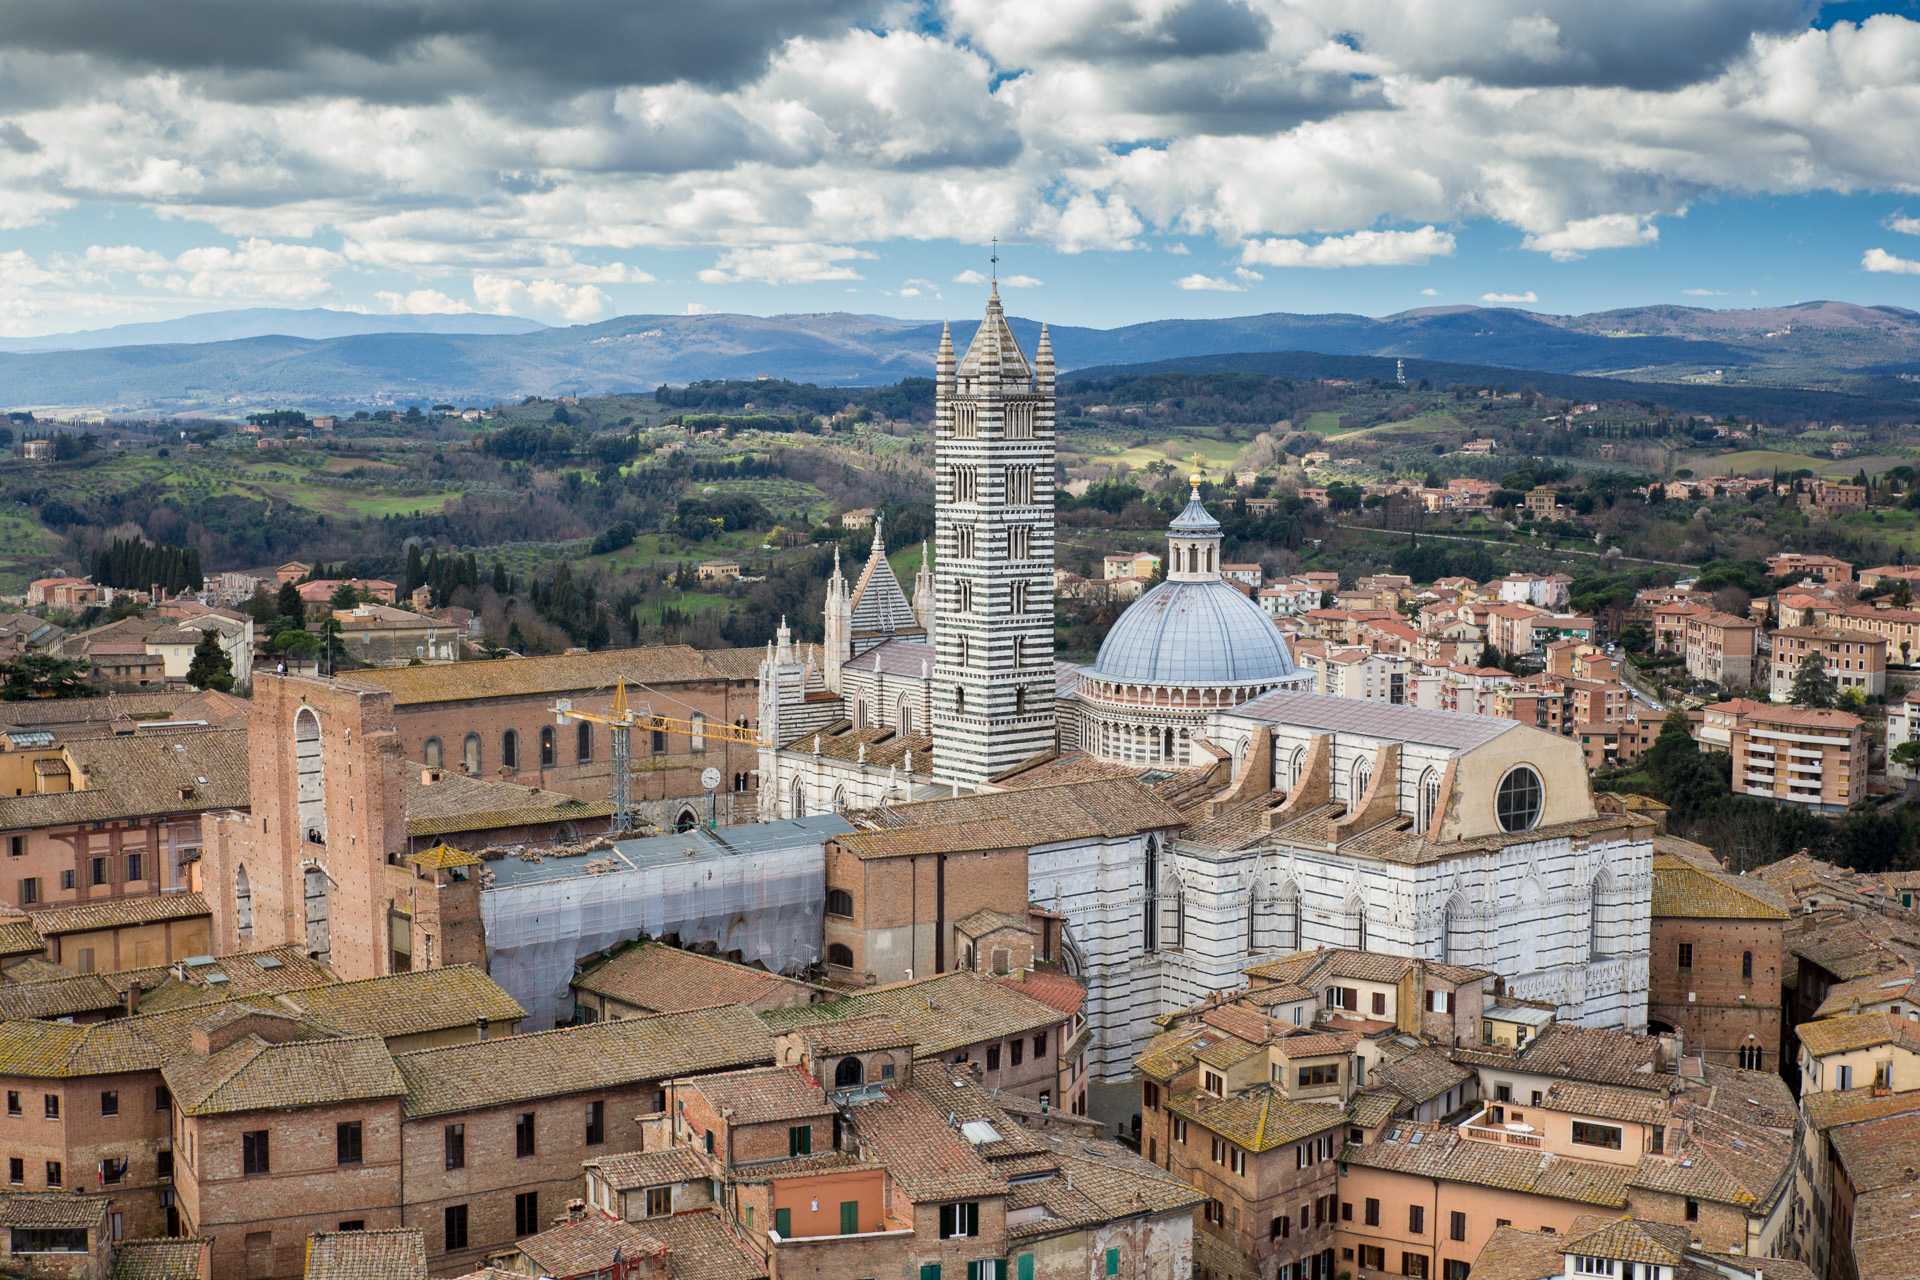 Cathedral of Siena from the Tower of the Mangia